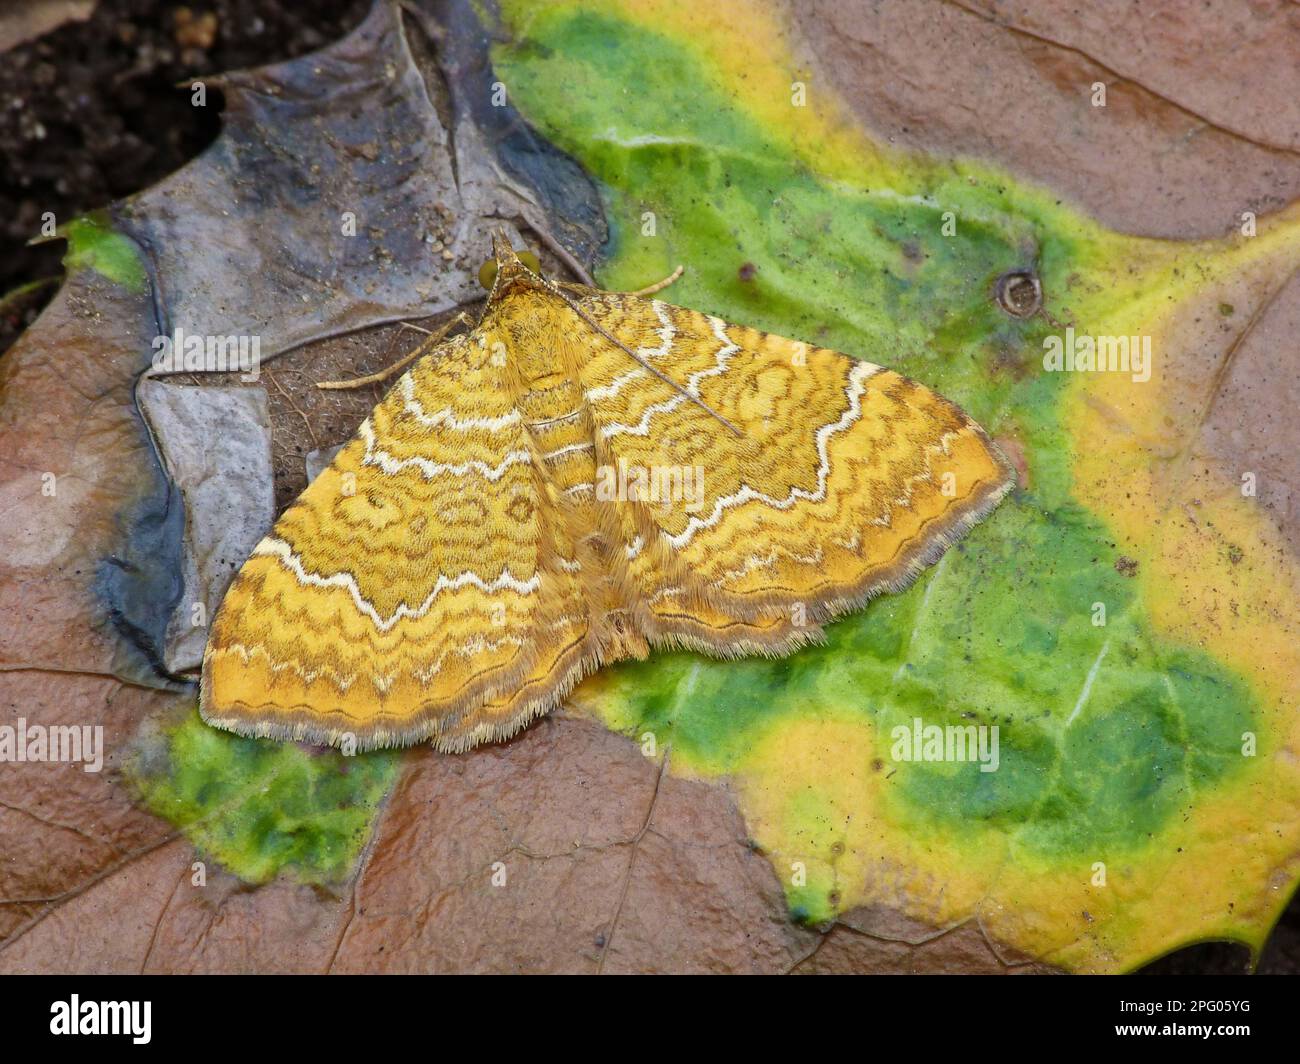 Yellow yellow shell (Camptogramma bilineata), adult, resting on a rotting leaf of European holly (Ilex aquifolium) in the garden, Leicestershire Stock Photo